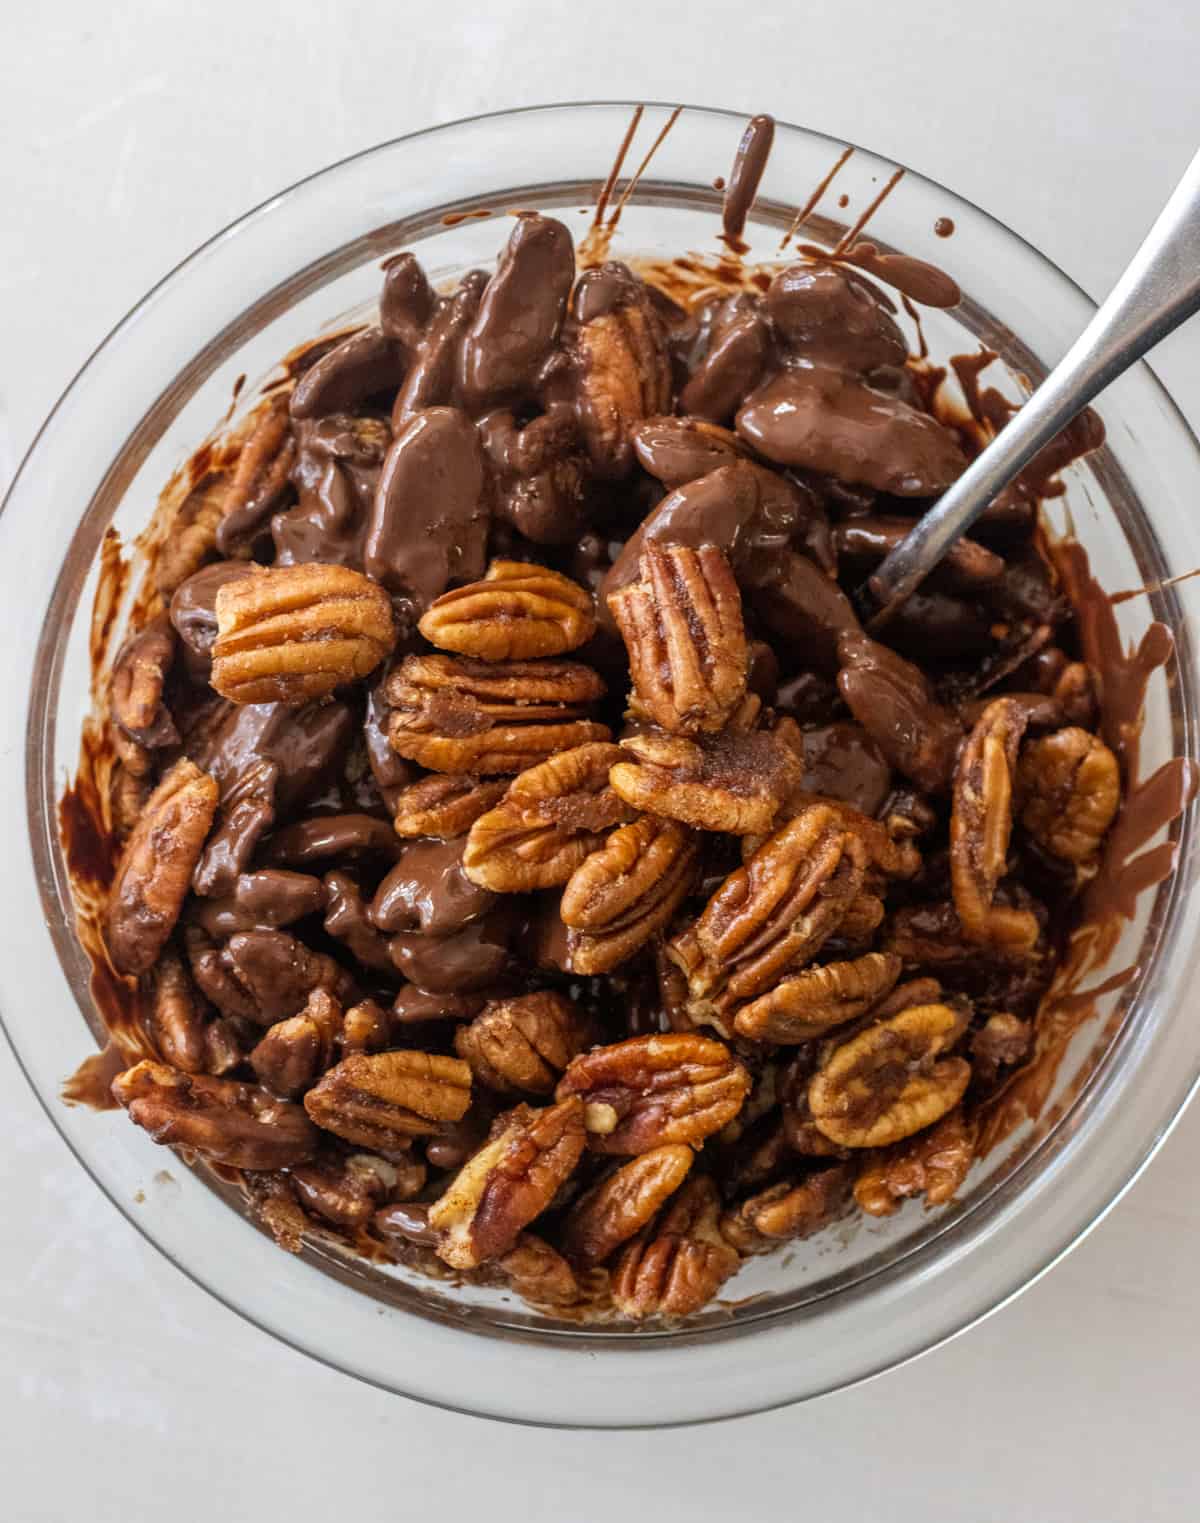 Pecan halves tossed in melted chocolate in a bowl.